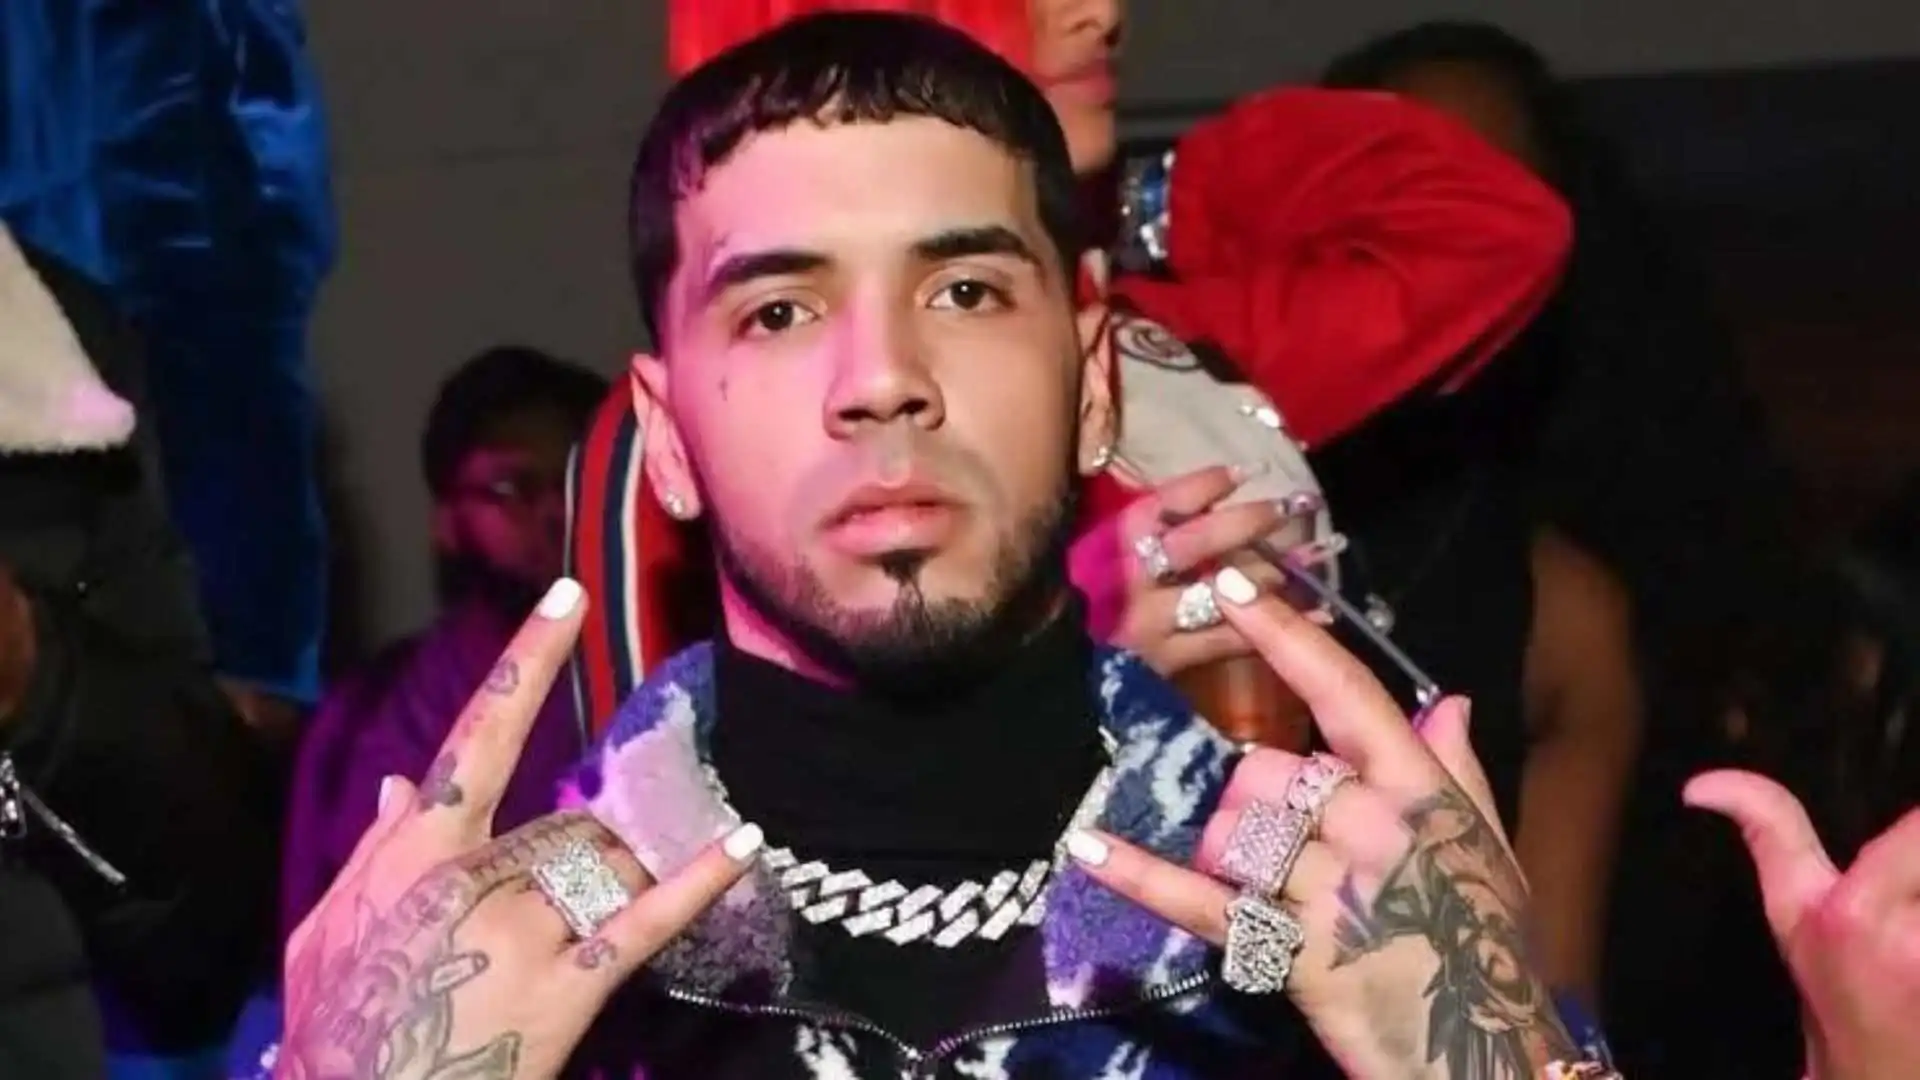 Anuel AA Net Worth The Rise of a Latin Trap Superstar